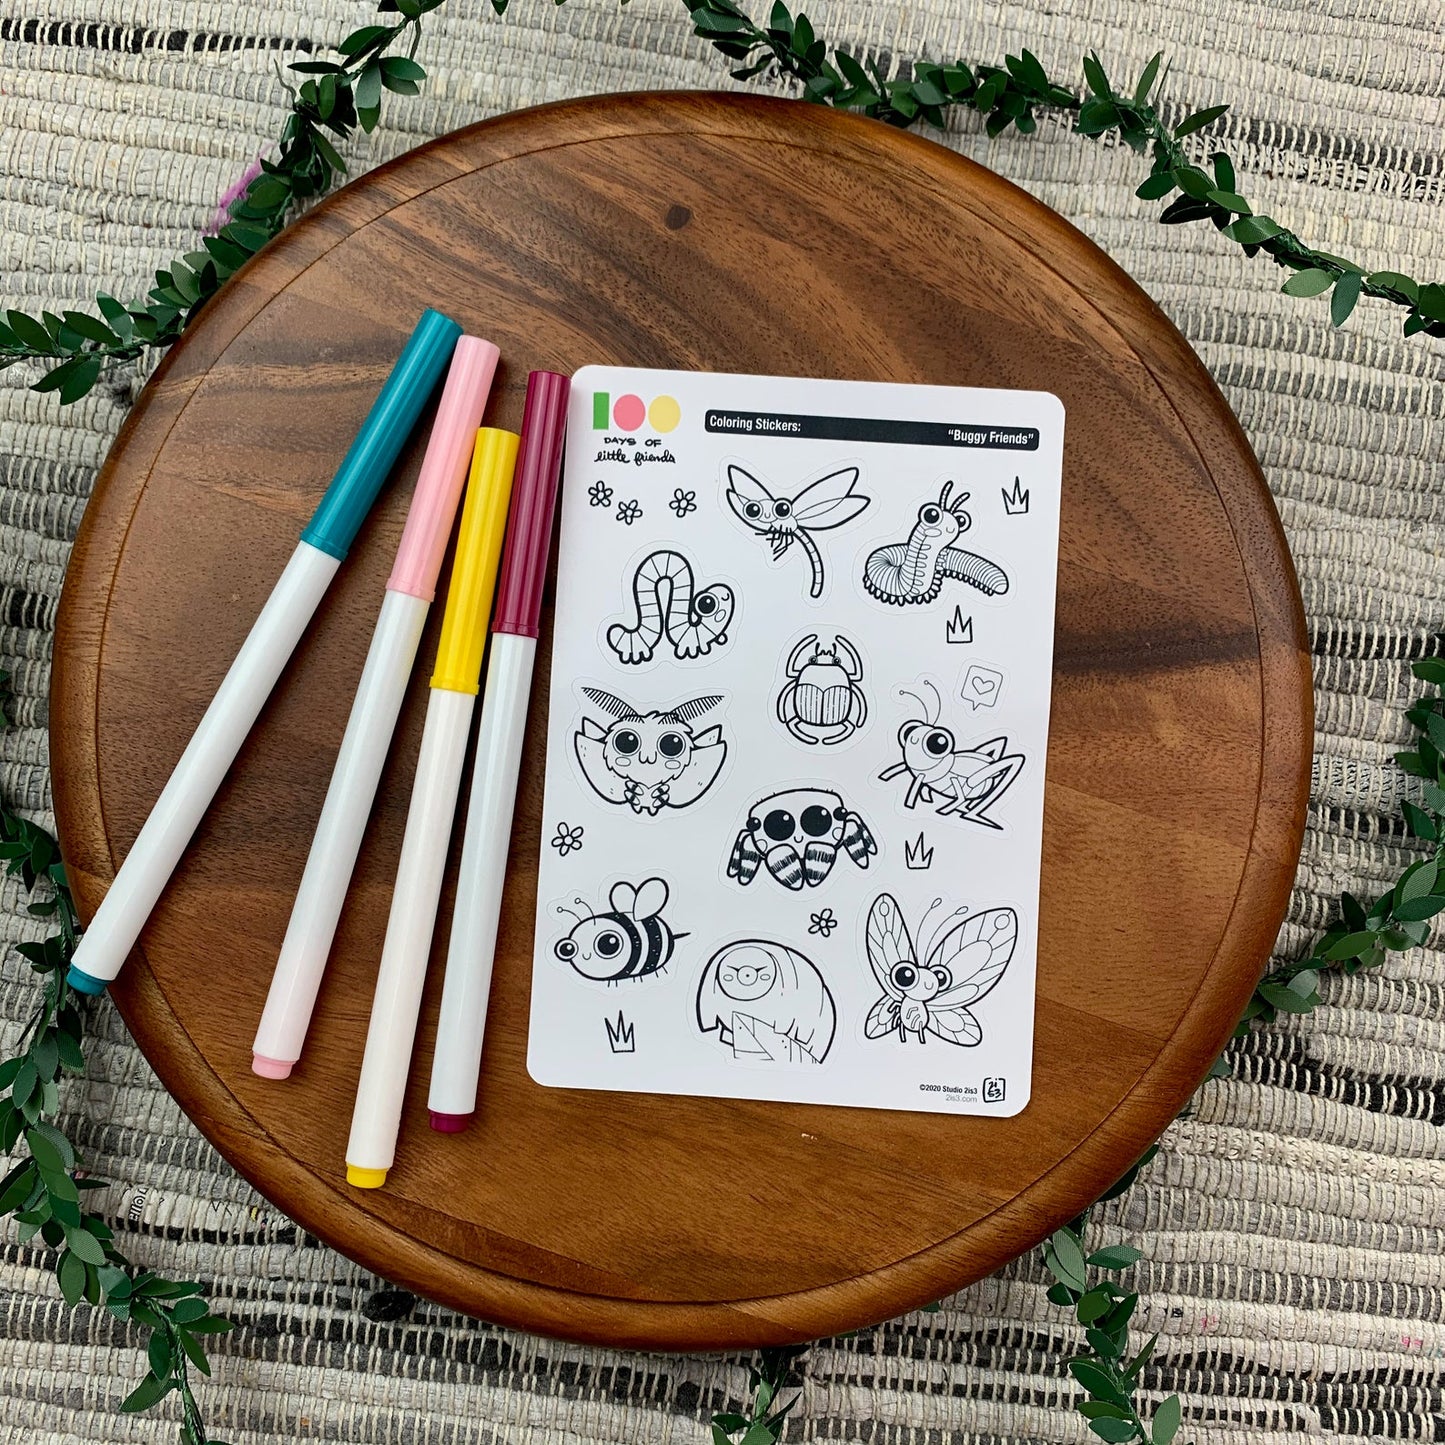 Markers and a sticker sheet with 10 little animal stickers on it. A Dragonfly, Millipede, Inchworm, Beetle, Moth, Spider, Grasshopper, Bee, Tardigrade, and Butterfly.